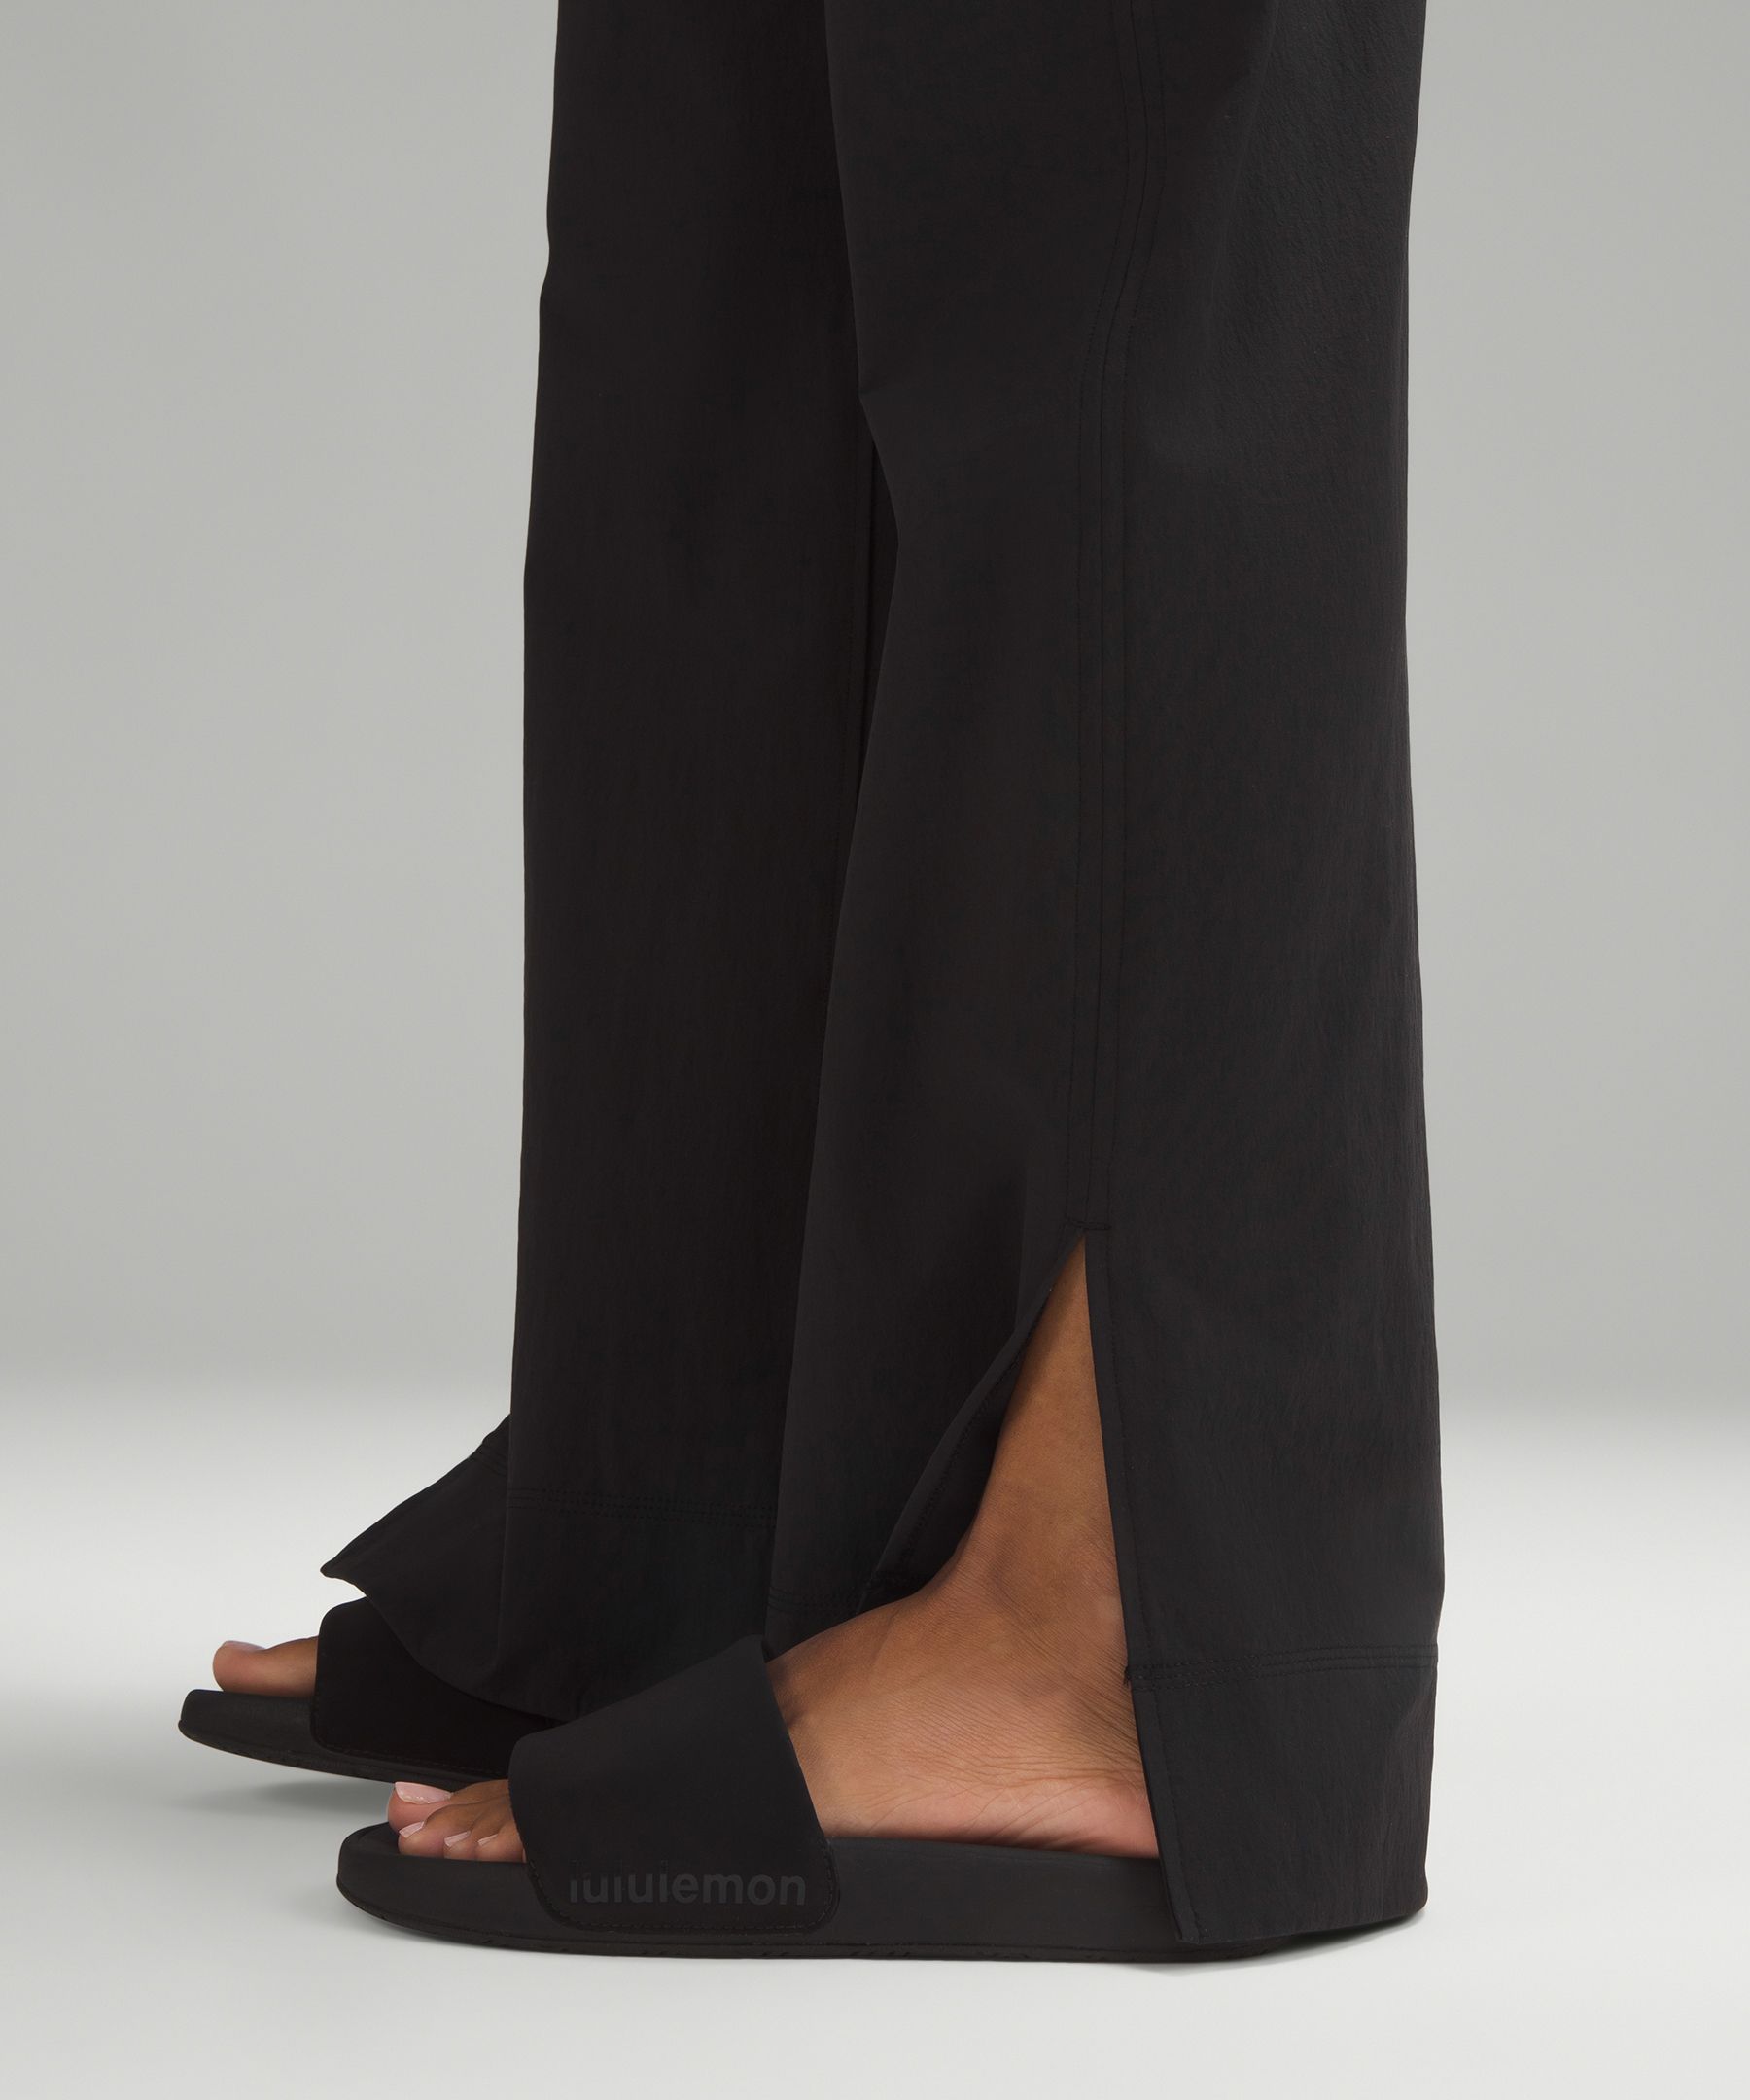 Stretch Woven High-Rise Wide-Leg Pant